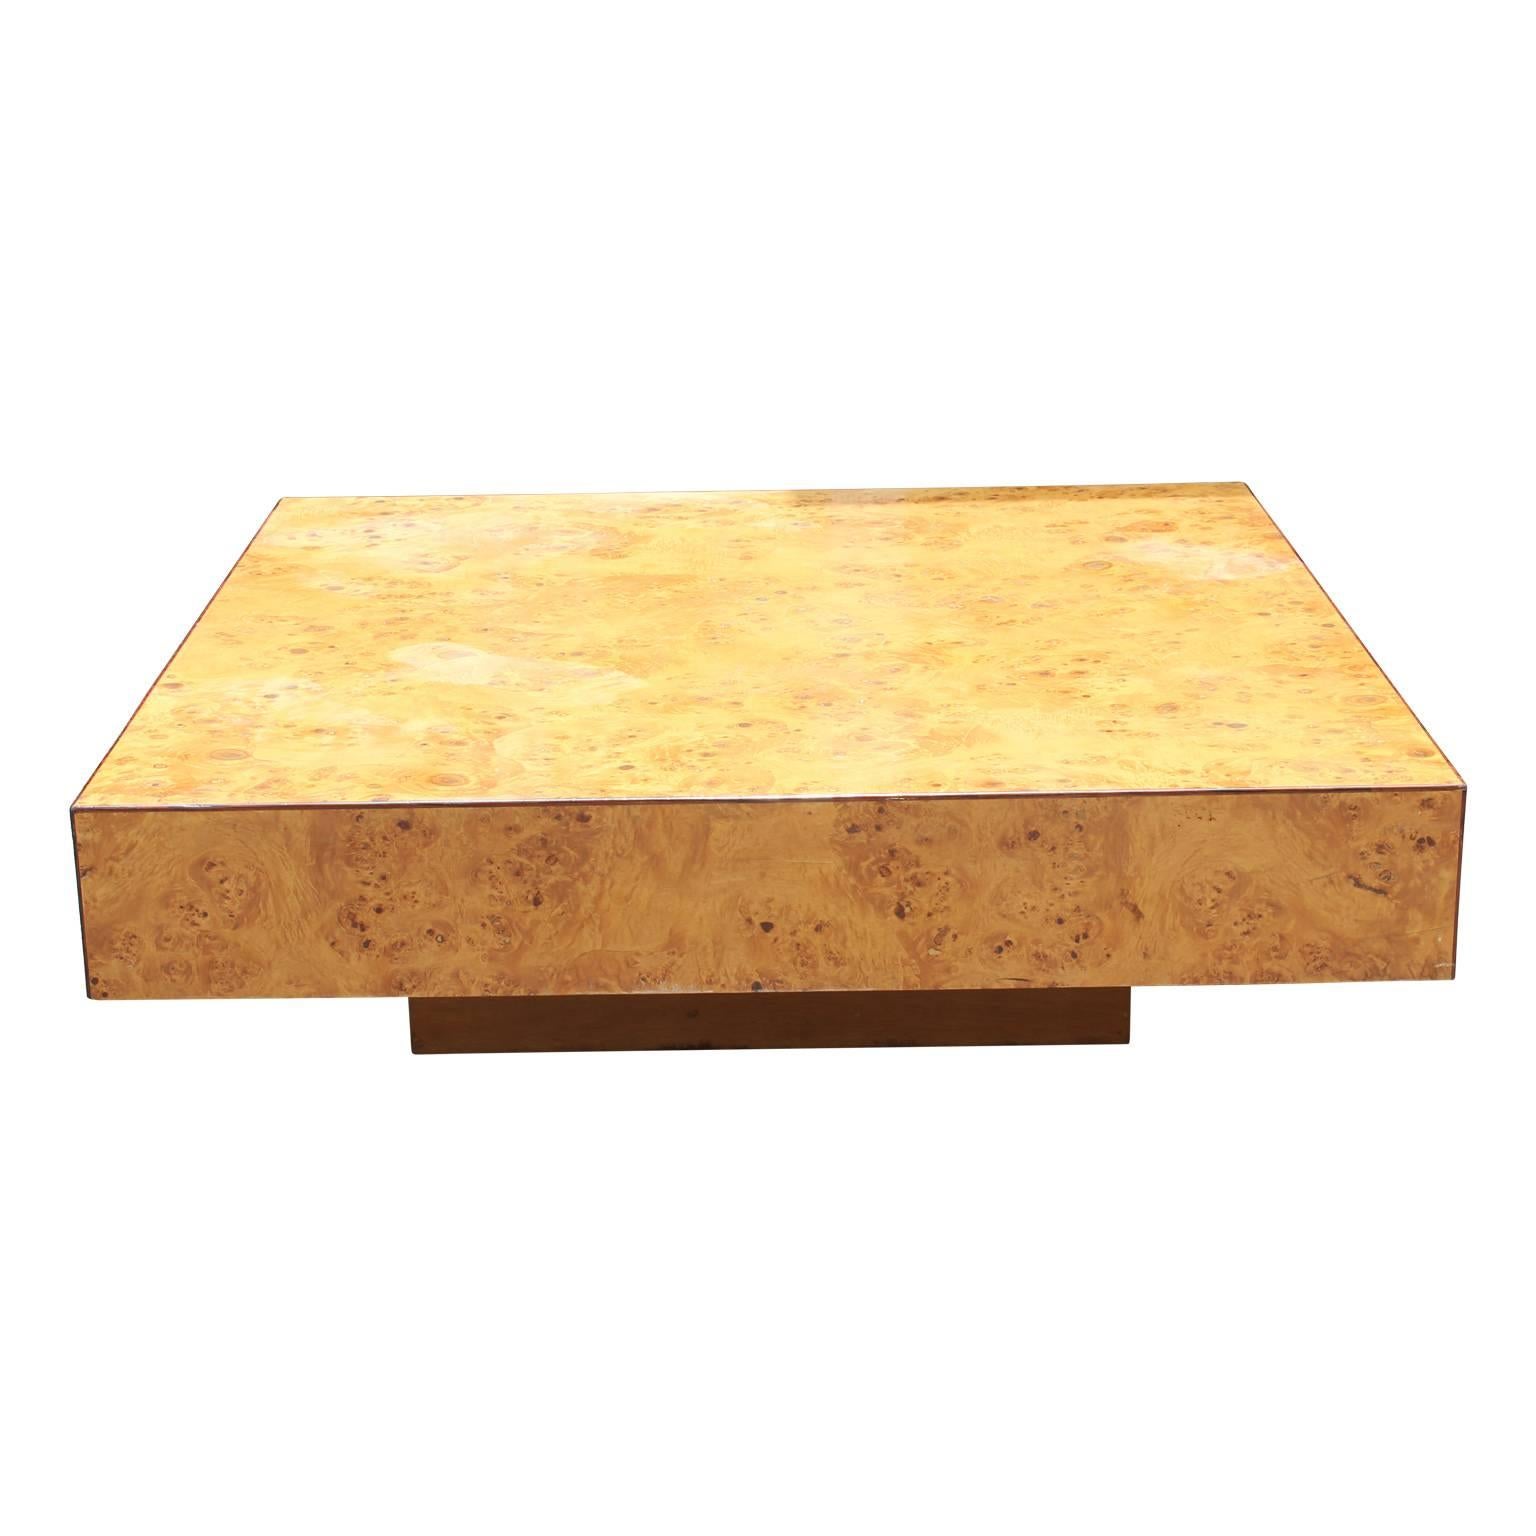 Stunning Milo Baughman style square burl wood coffee table. In excellent vintage condition.